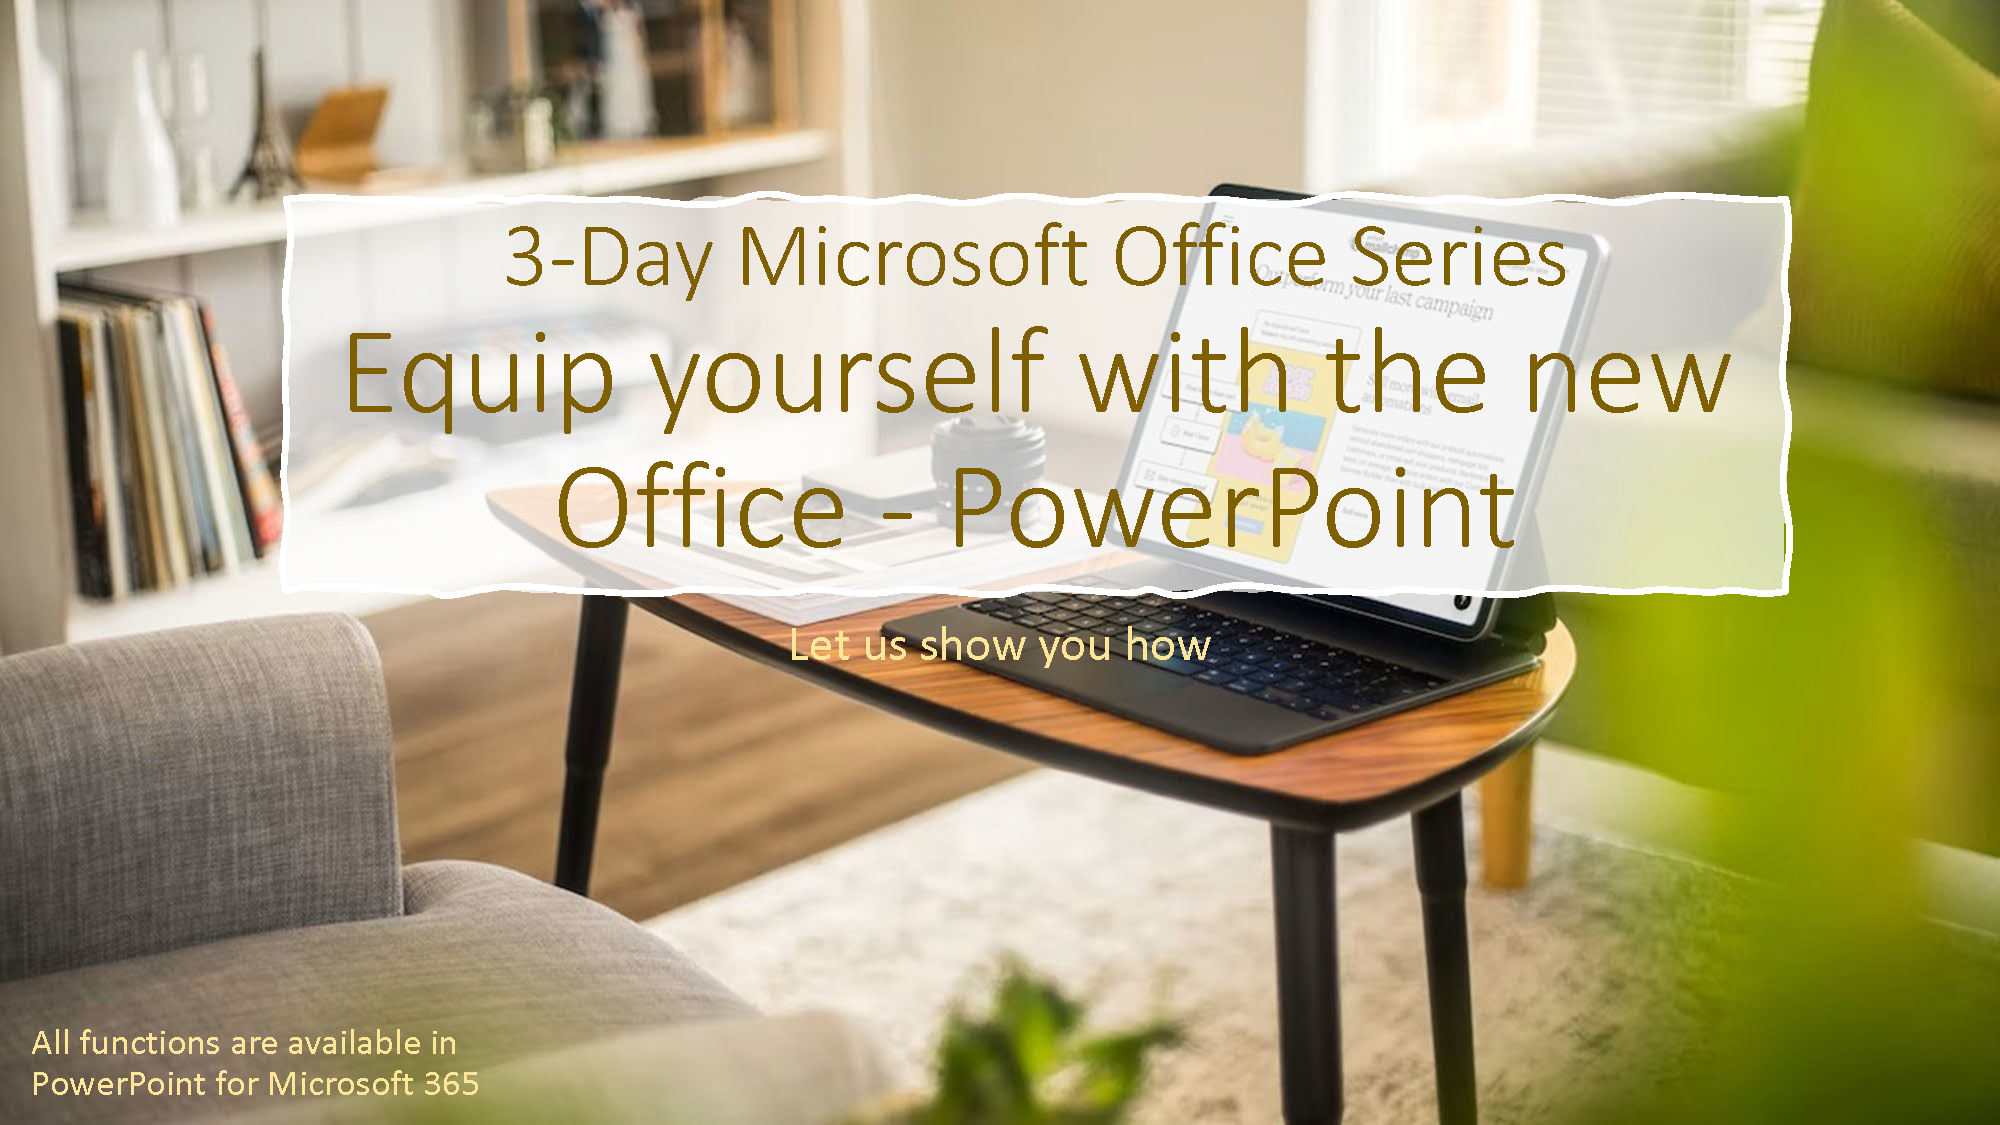 3-Day Microsoft Office Series: Equip yourself with the new Office – PowerPoint